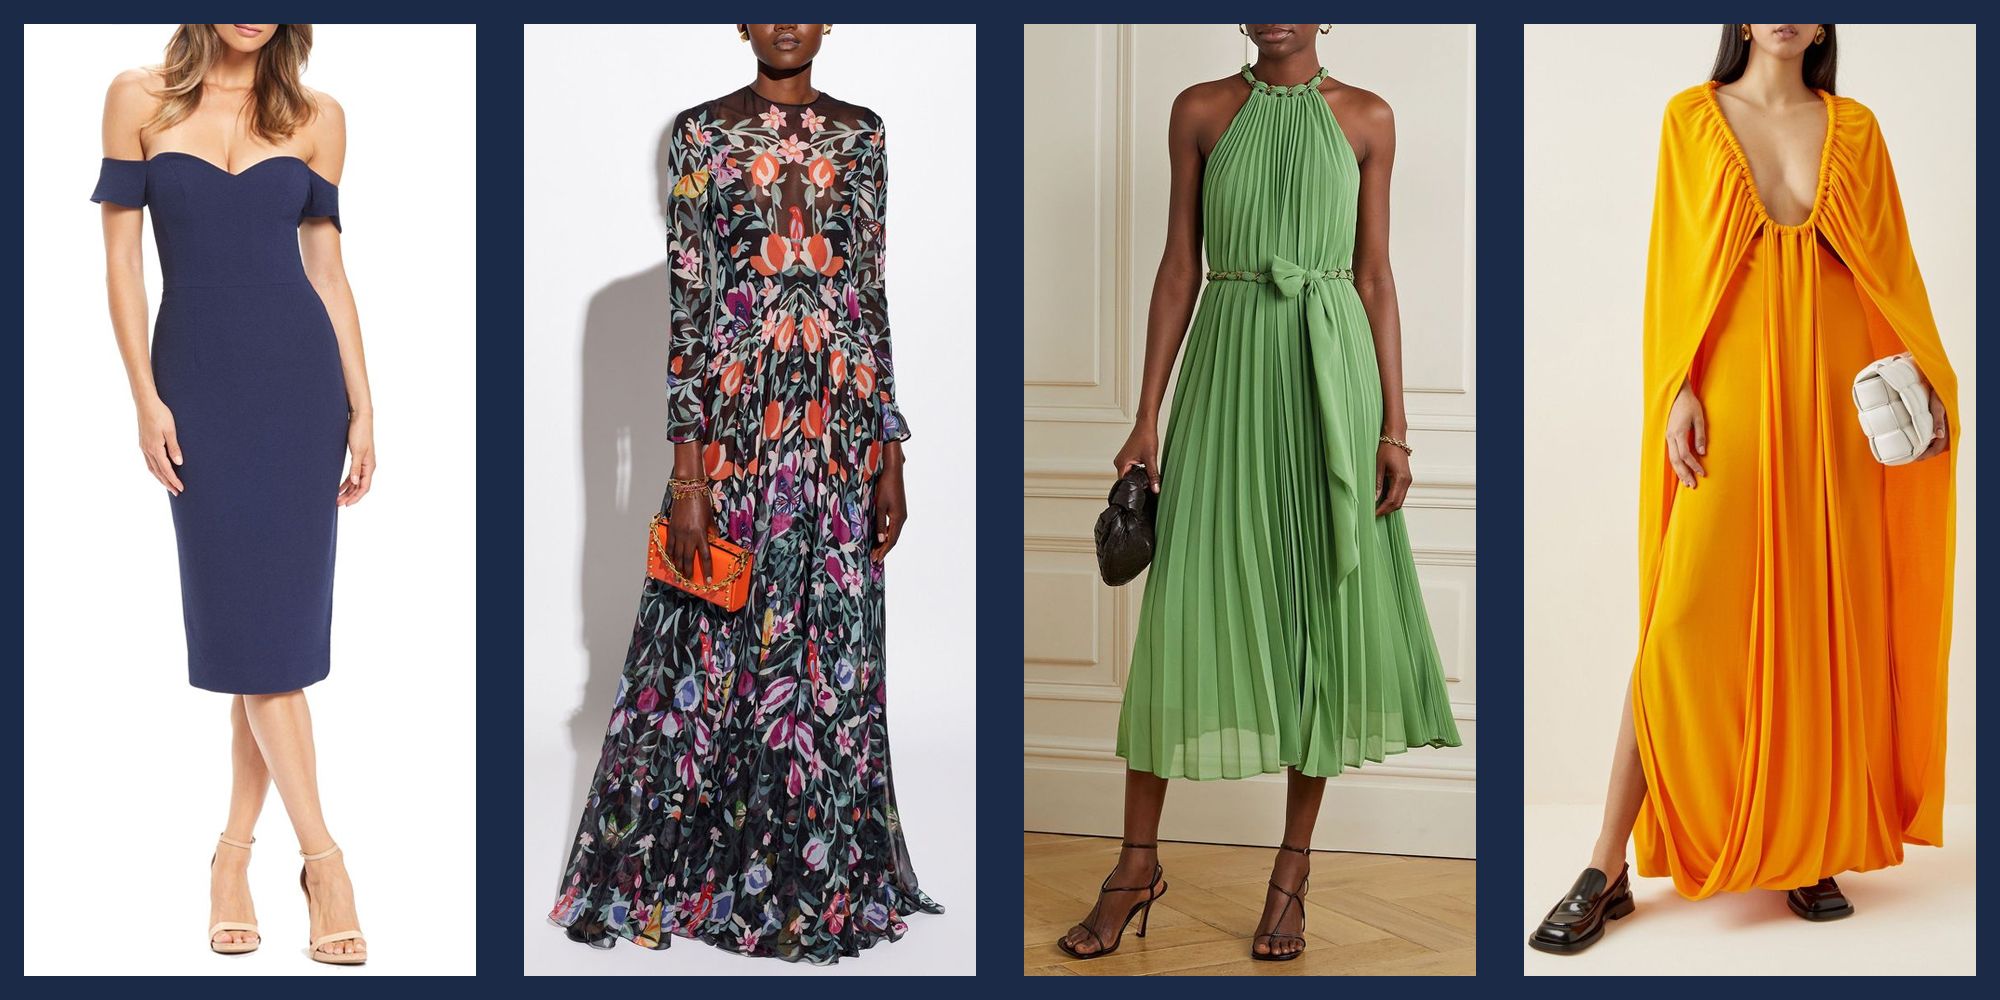 Spring Wedding Guest Dresses: 26 of the Prettiest Picks -  